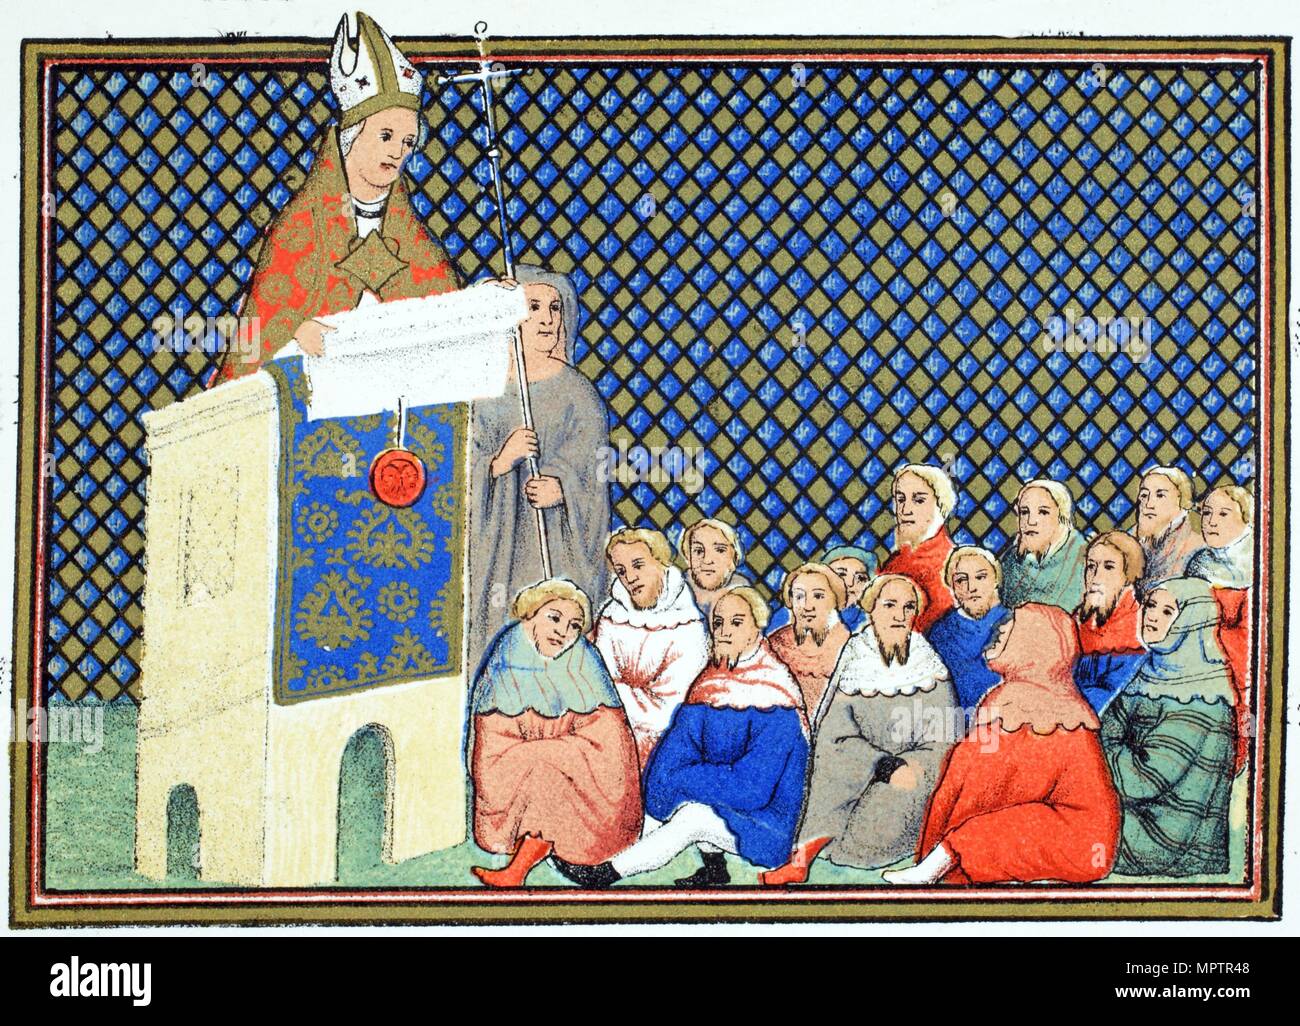 The Archbishop of Canterbury preaching to the English nobility against Richard II, 19th century. Stock Photo